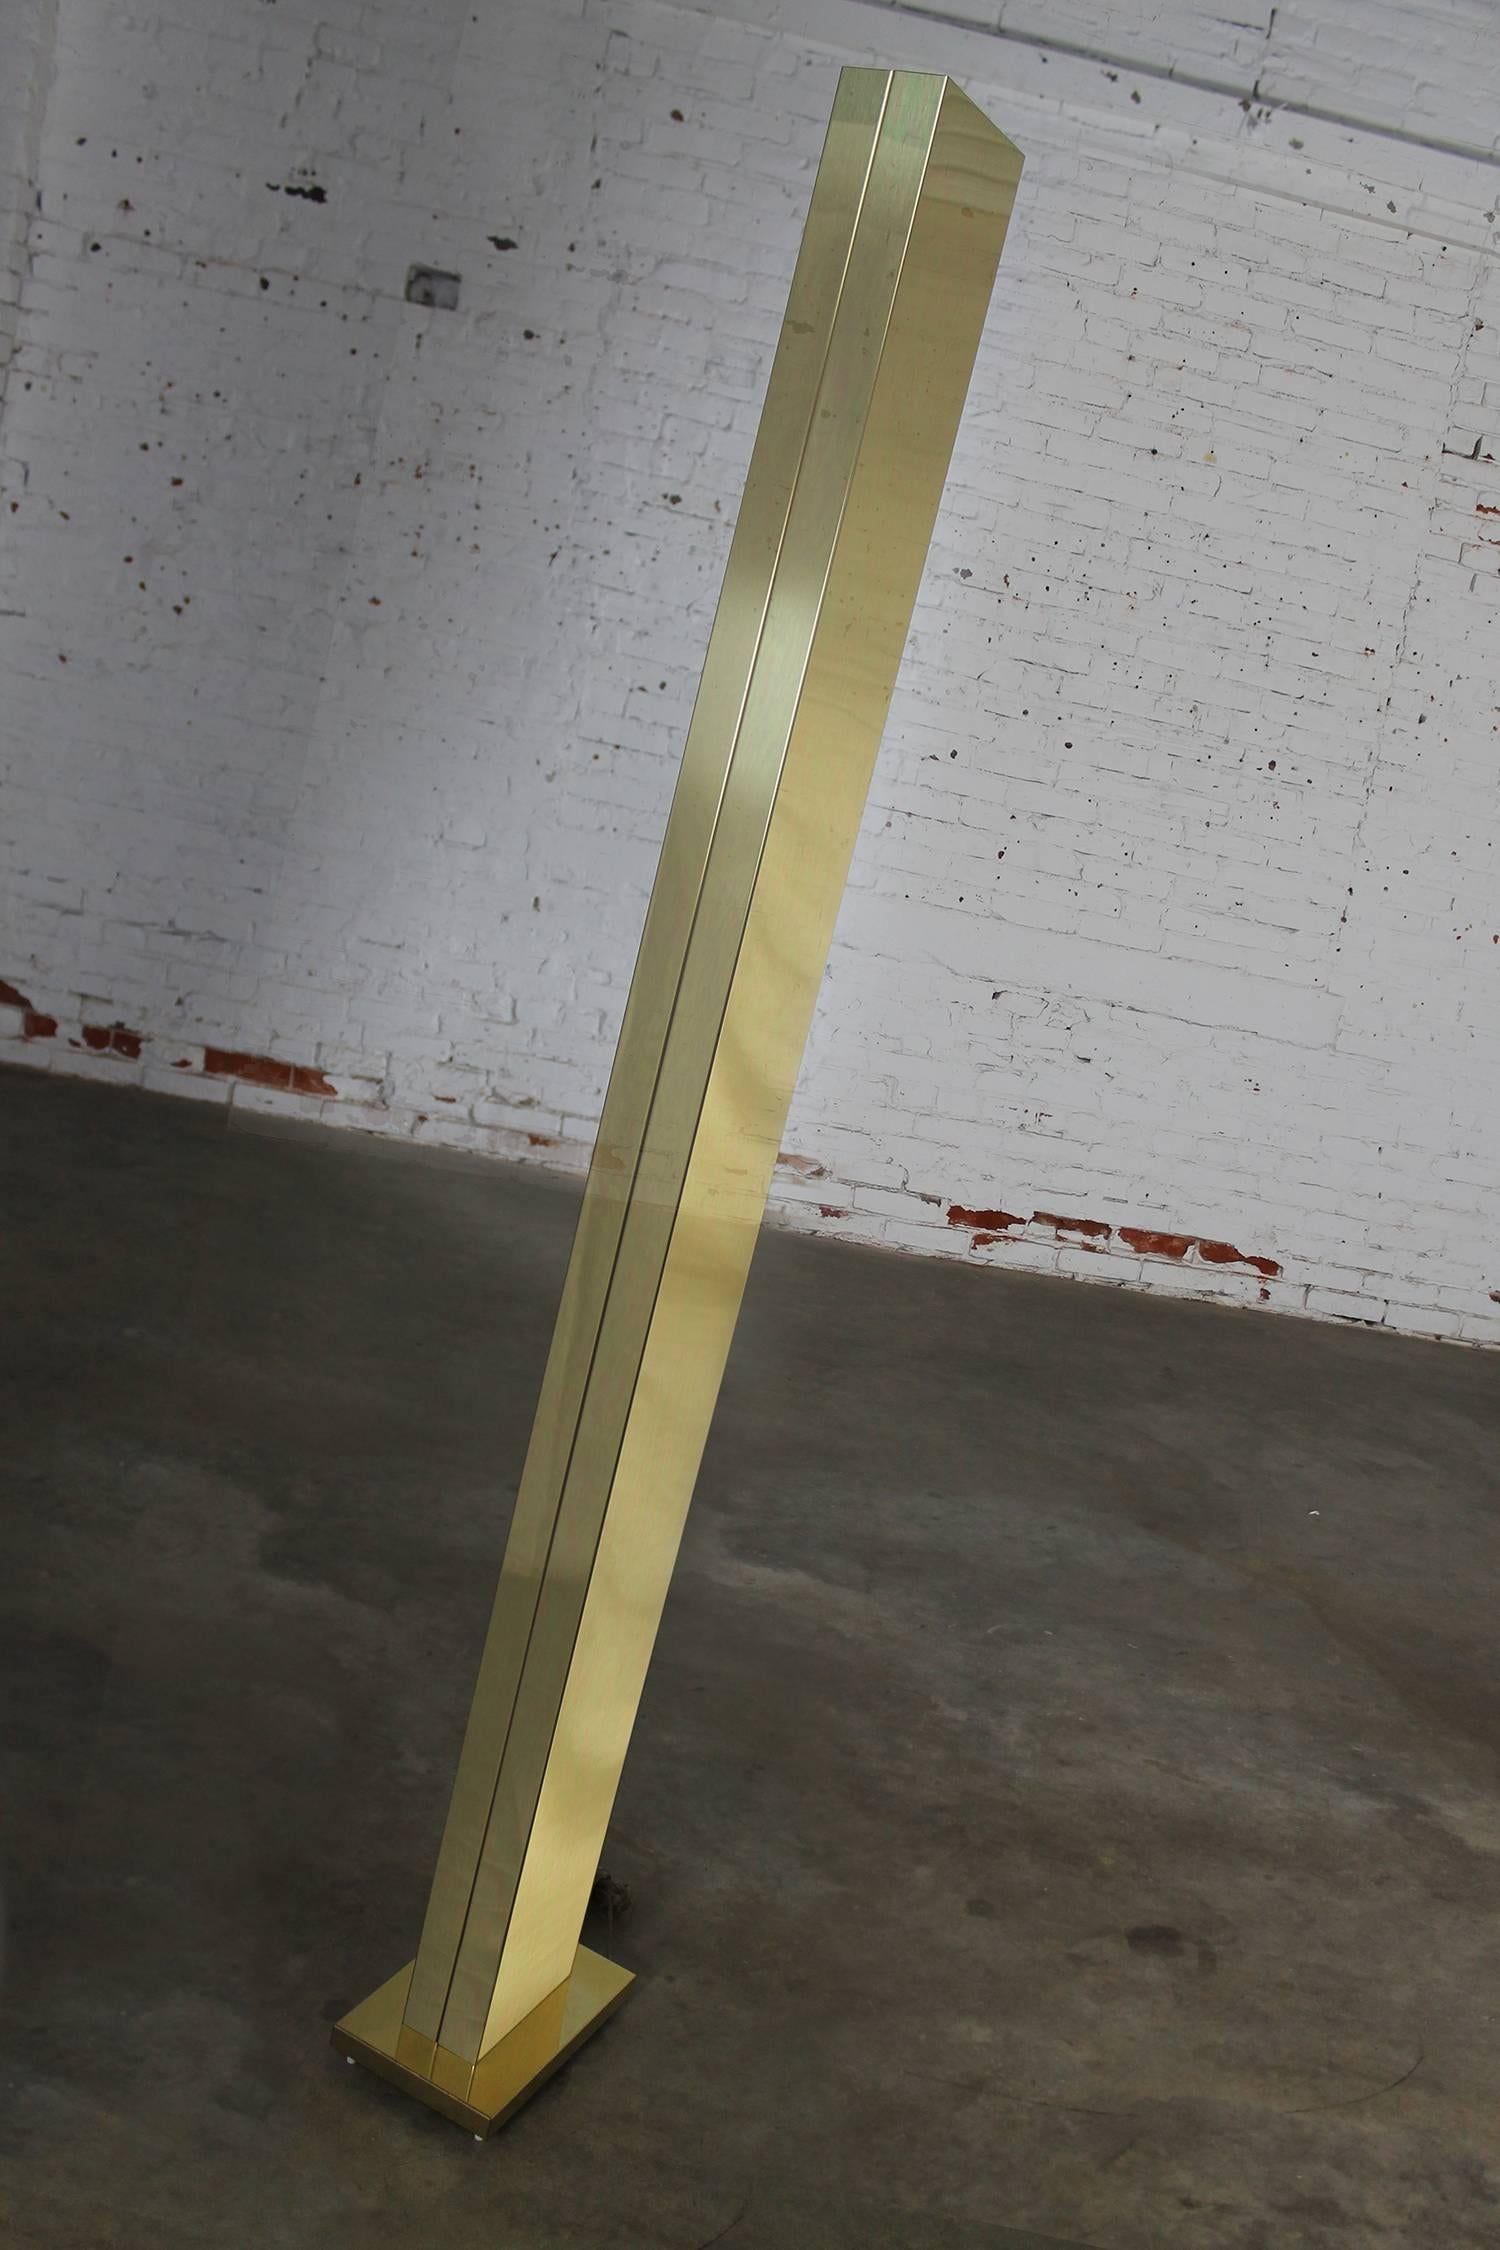 Outstanding and dramatic torchiere floor lamp by Casella Lighting. This monolith skyscraper style lamp has a polished brass plated finish and is in wonderful vintage condition. It takes a halogen bulb with 500-watt max and has a slide dimmer on the